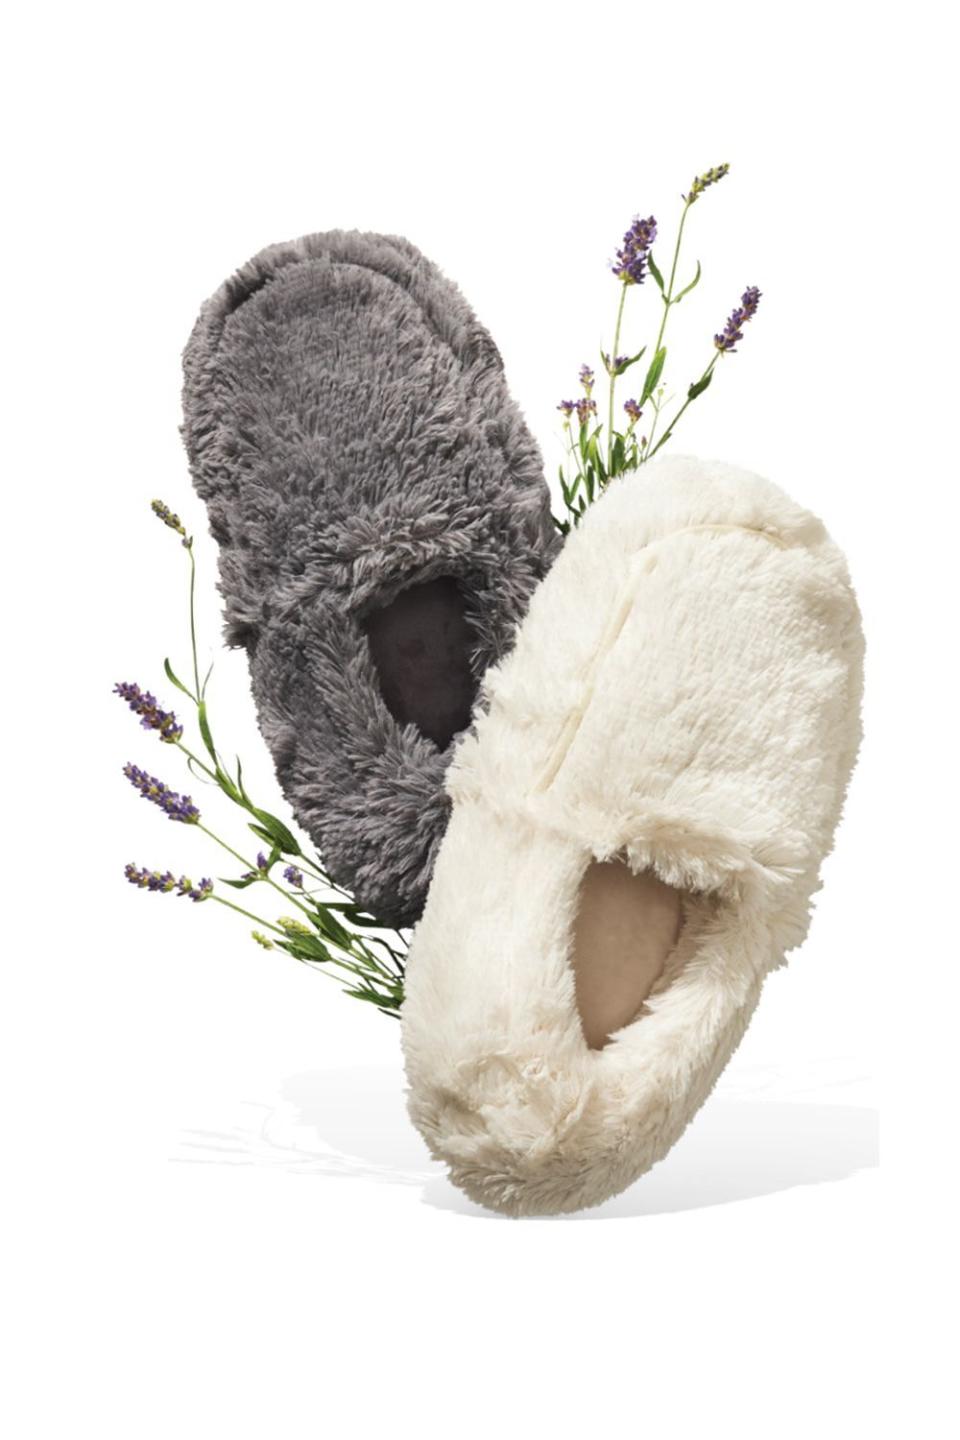 1) Warmies Slippers